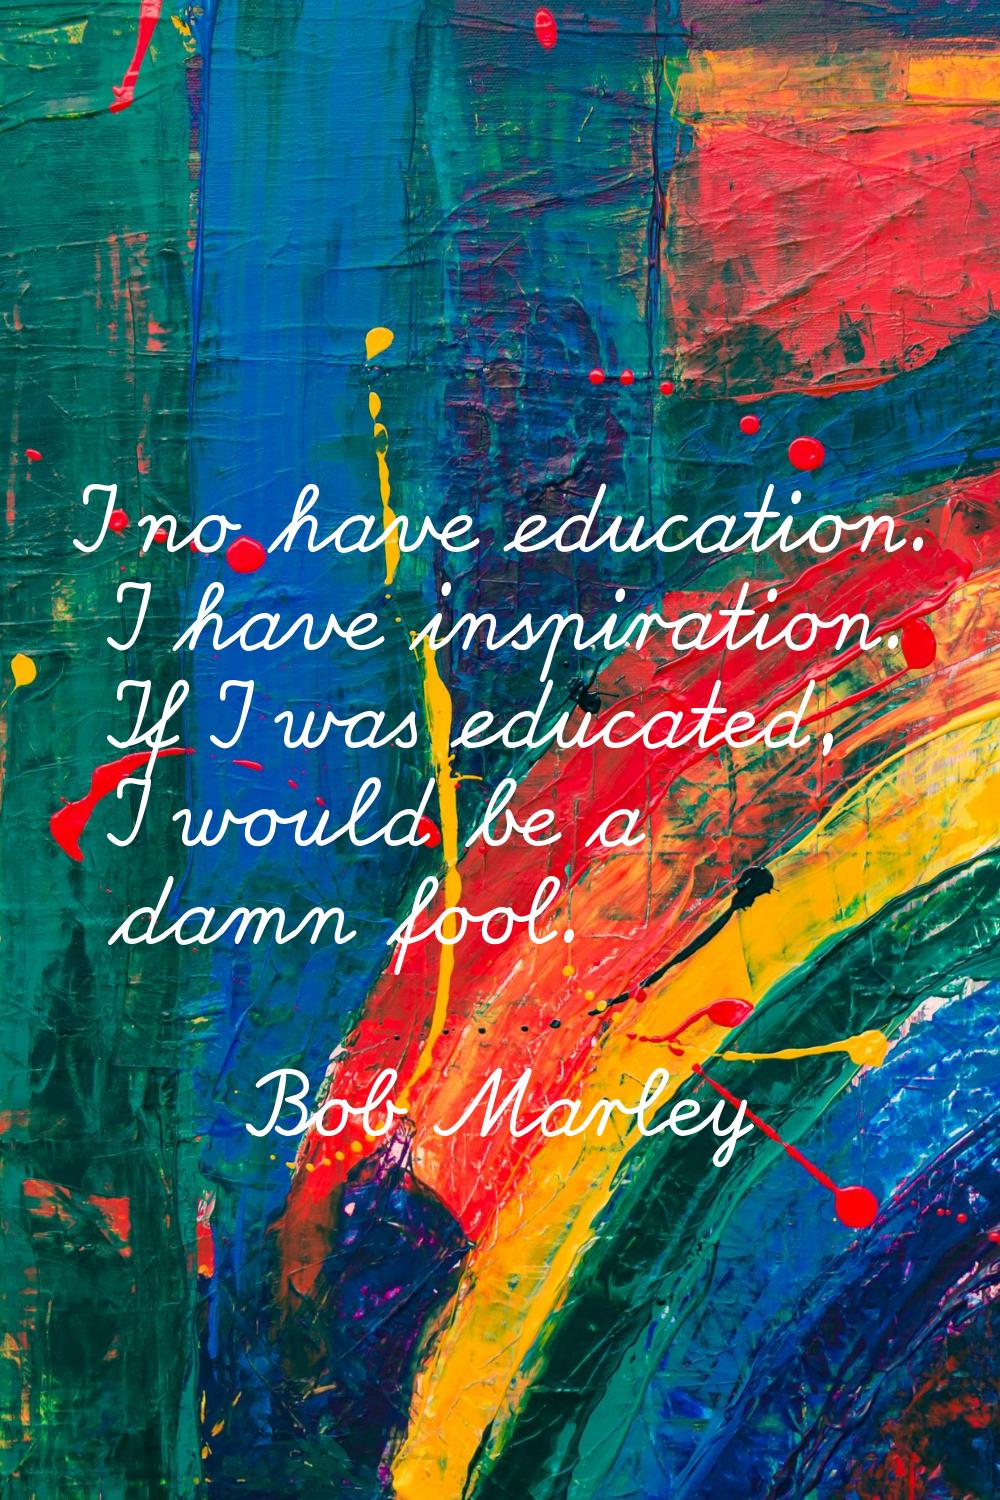 I no have education. I have inspiration. If I was educated, I would be a damn fool.